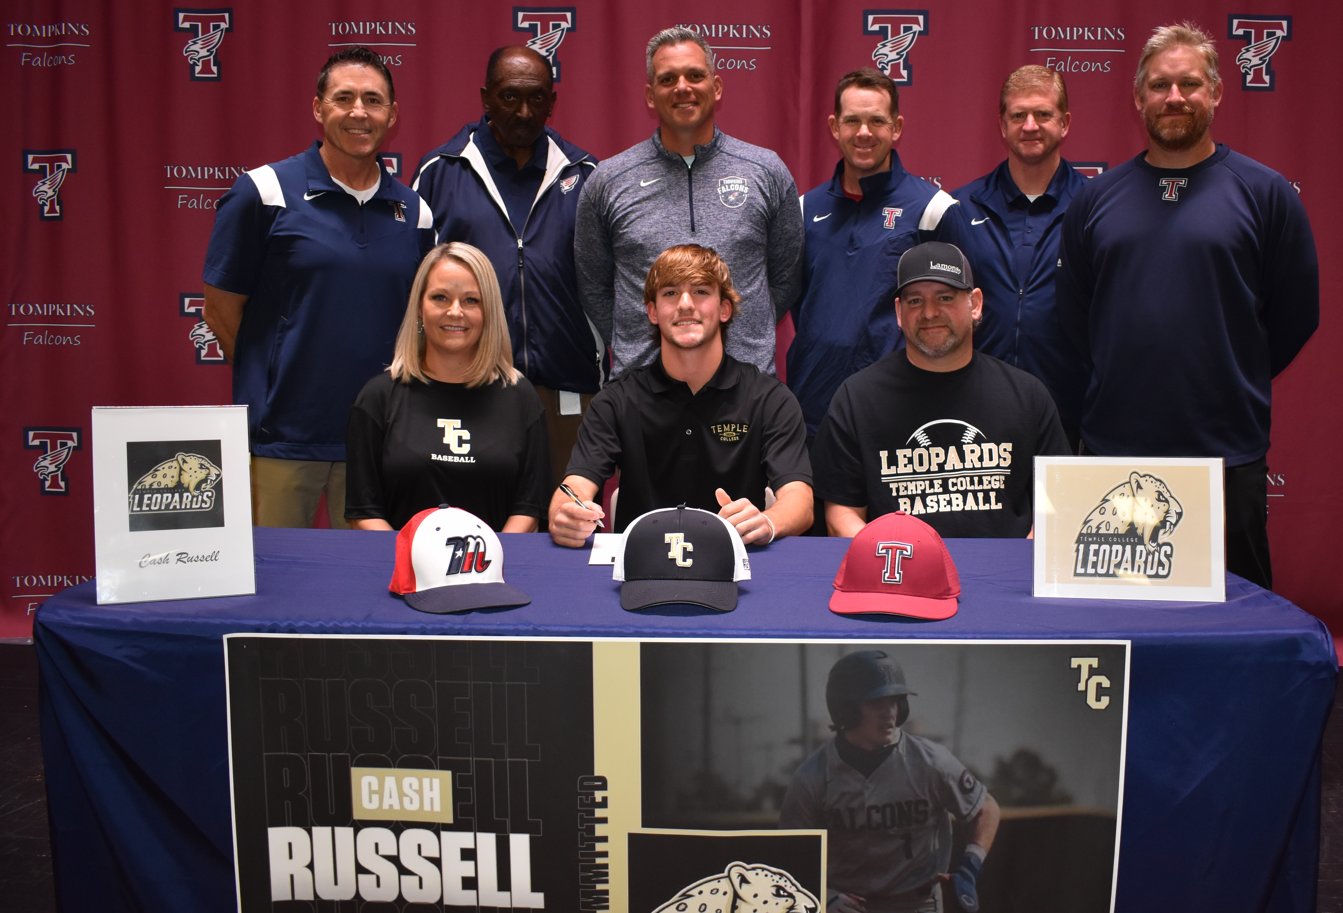 Cash Russell signed with Temple College to play baseball.